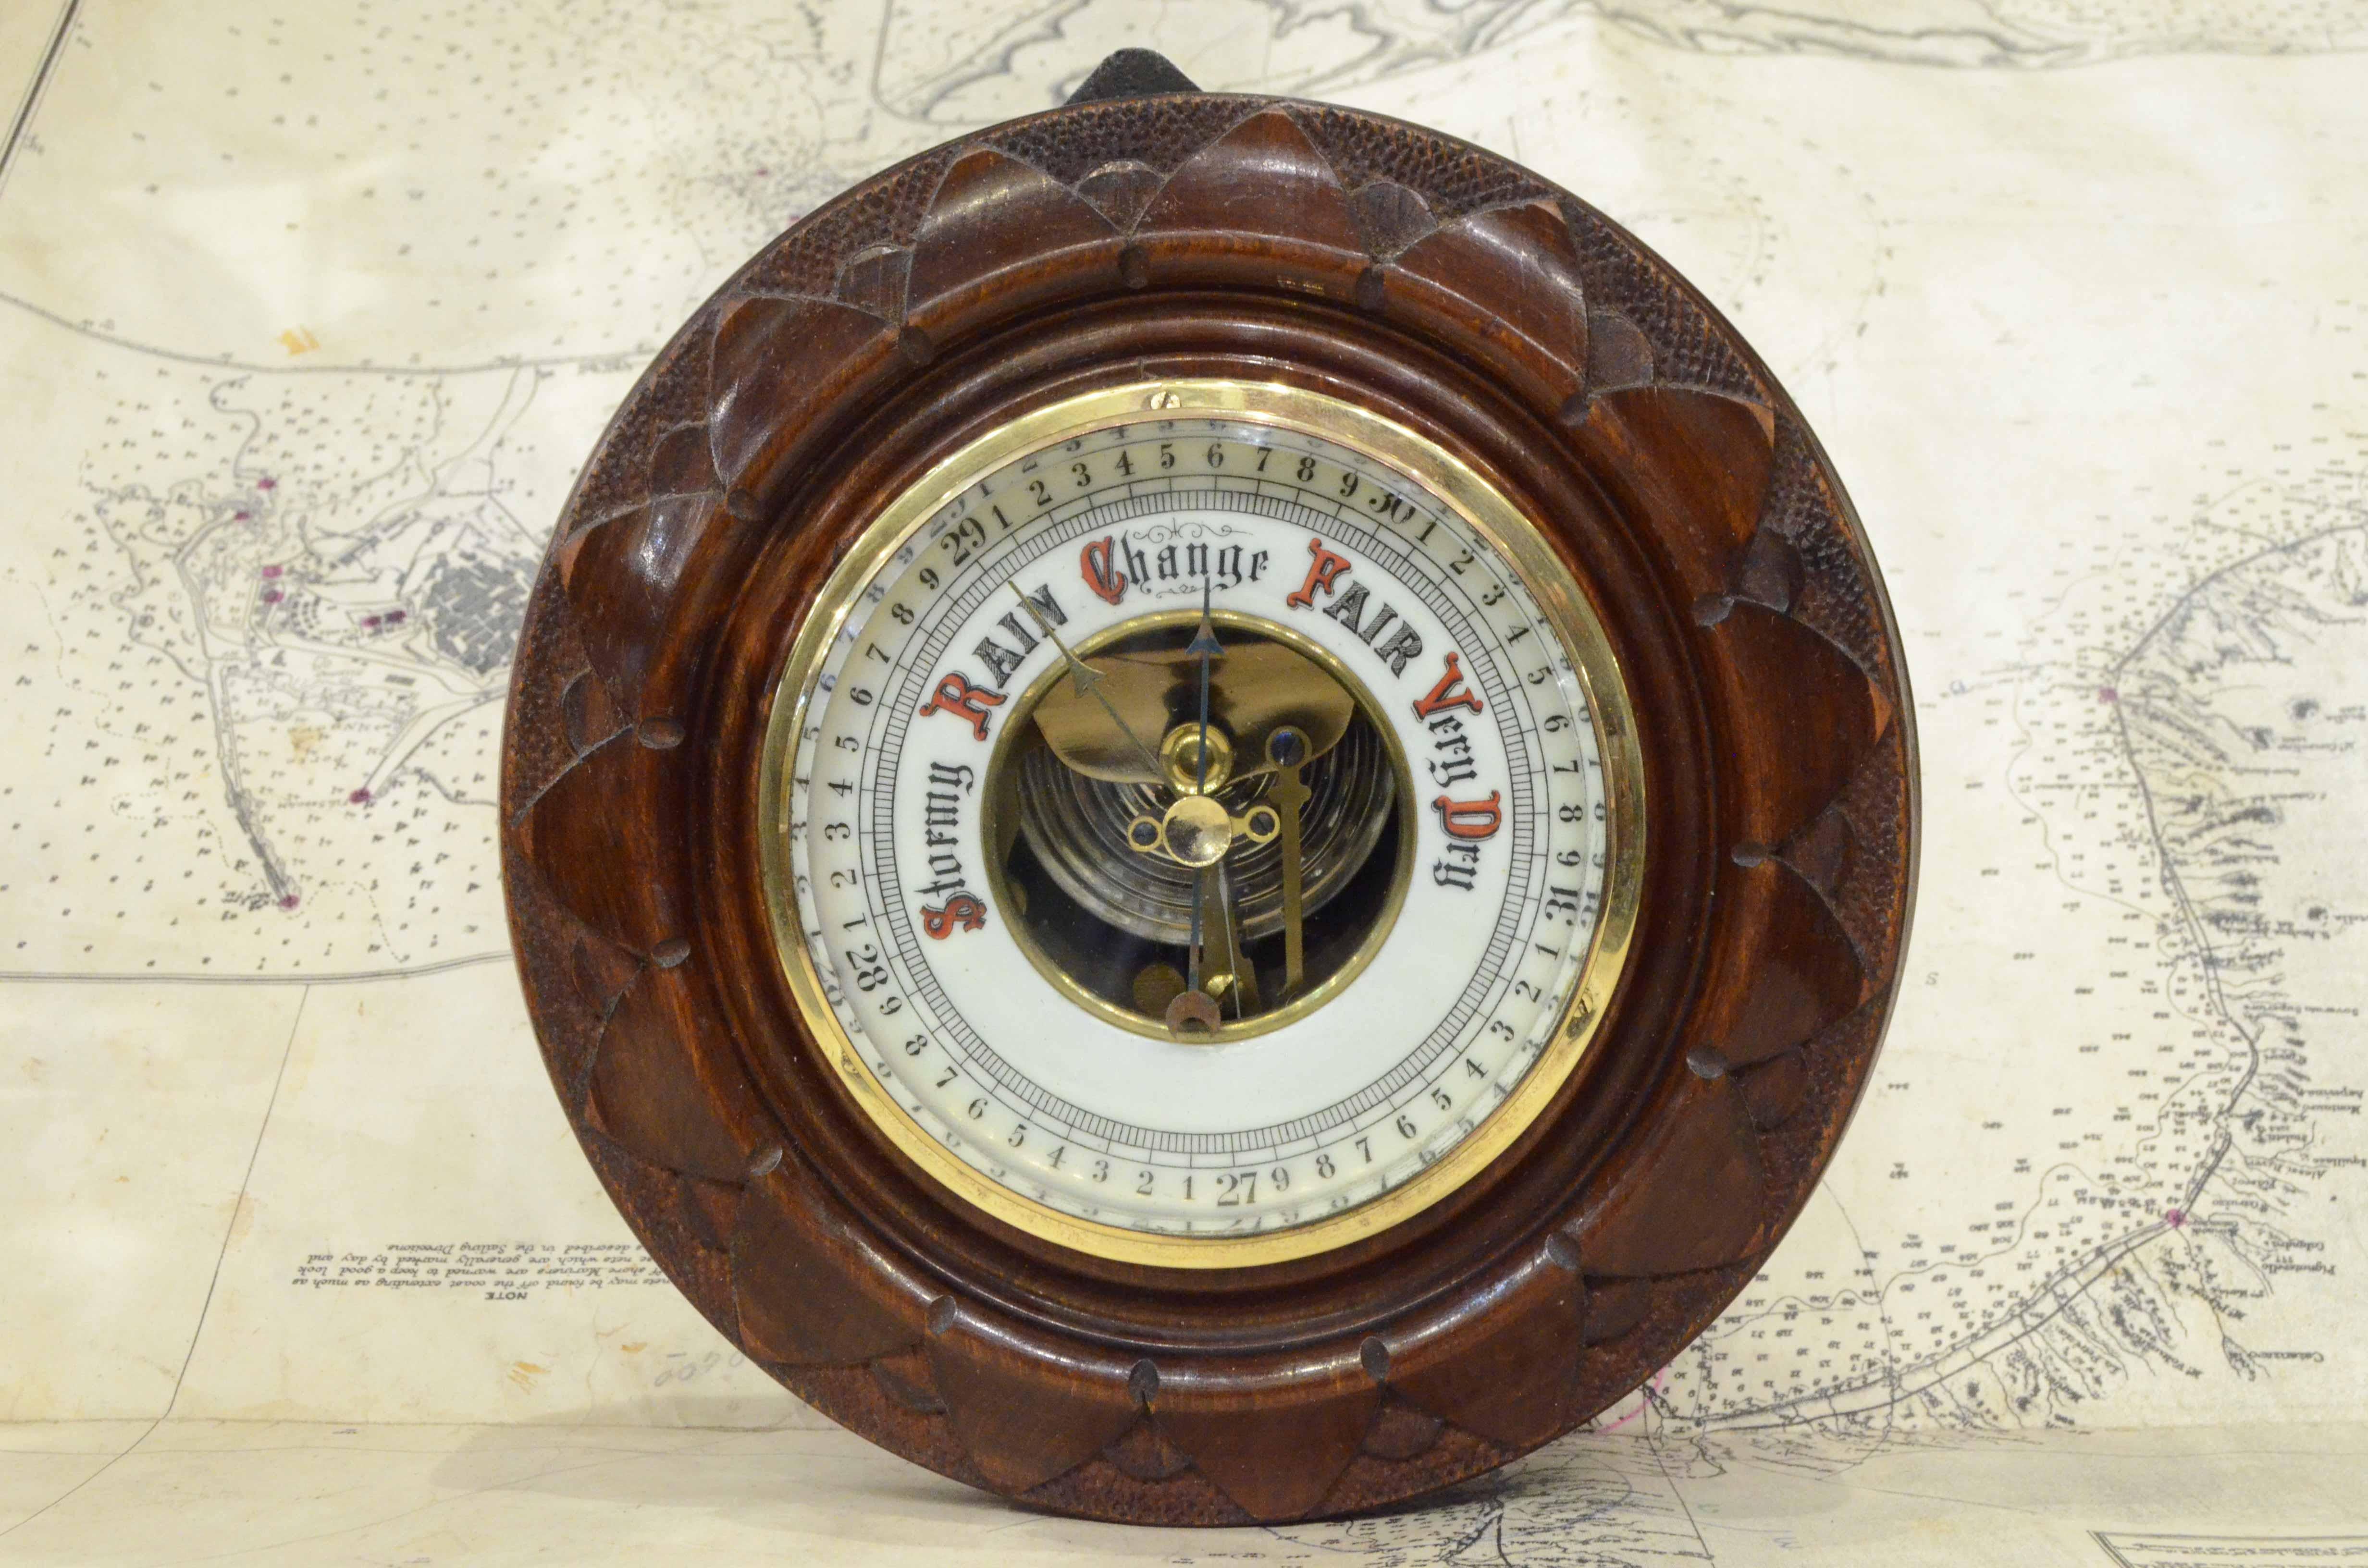 Antique English aneroid barometer, early 1900s, carved oak wood, glass and brass. 
Good condition and in order. 
Diameter cm 17 - inches 6.8, height cm 4.8 - inches 2.9. 

It’s an antique measuring instrument having an element sensitive to